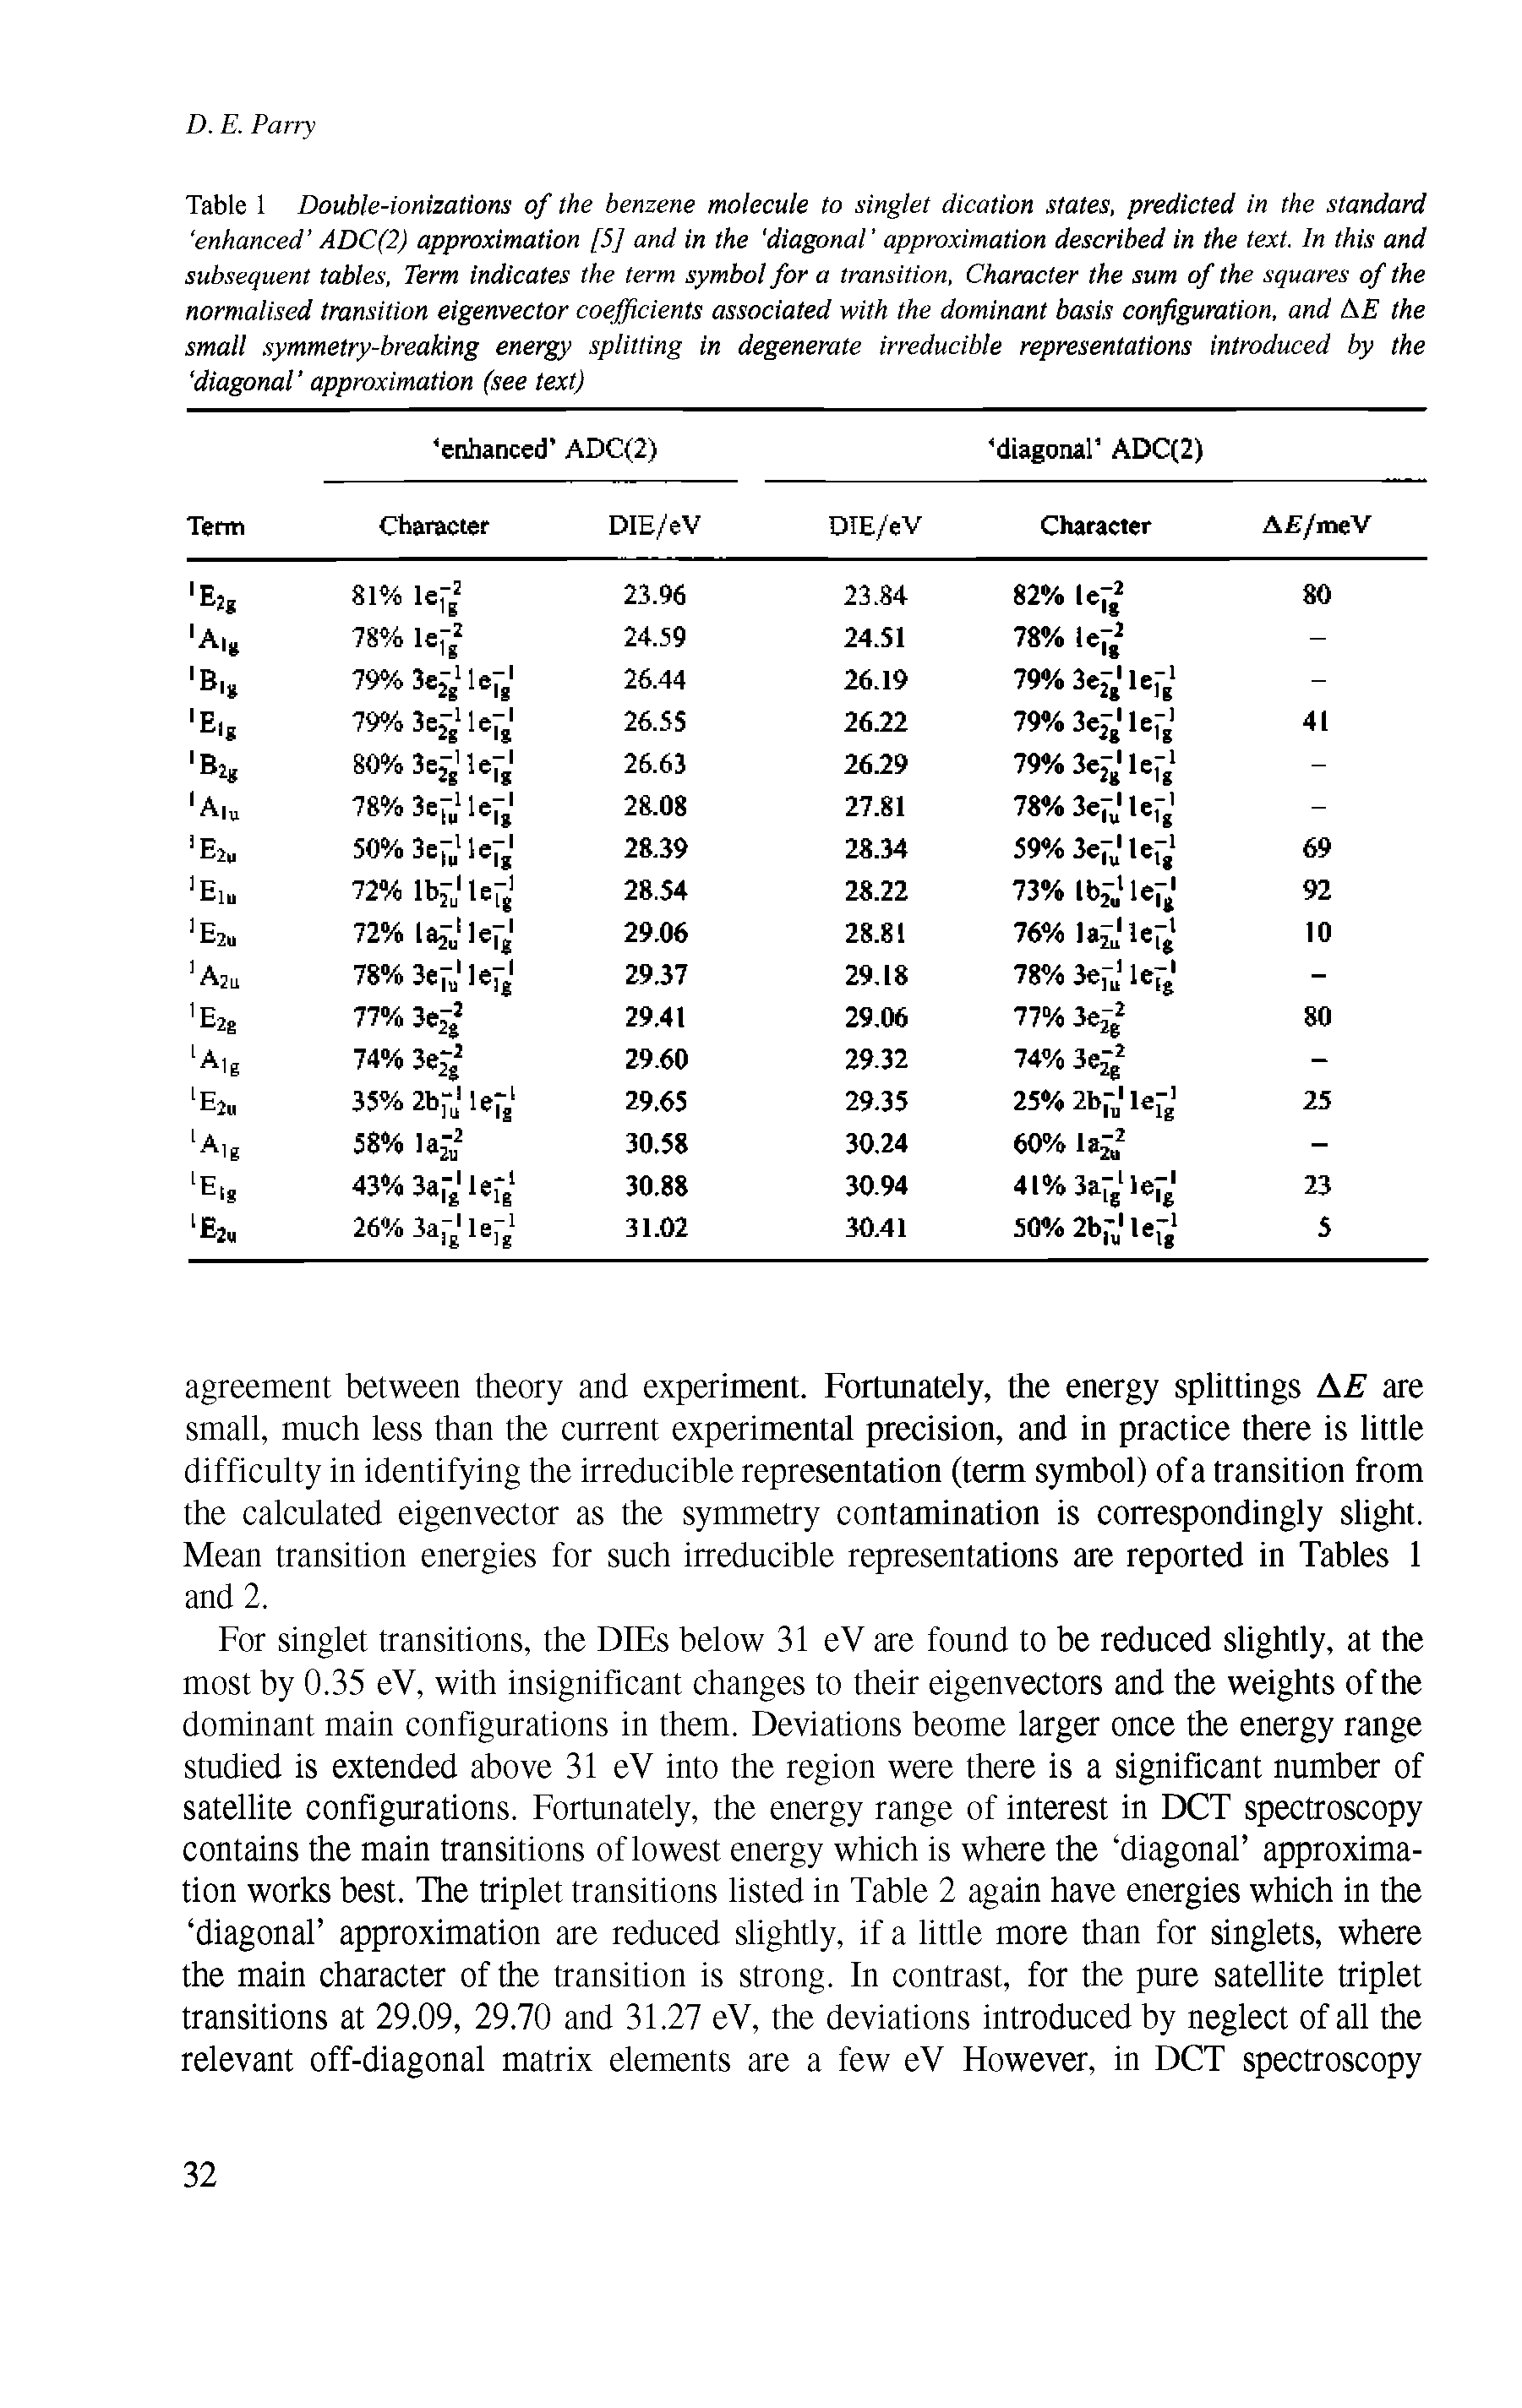 Table 1 Double-ionizations of the benzene molecule to singlet dication states, predicted in the standard enhanced ADC(2) approximation [5] and in the diagonal approximation described in the text. In this and subsequent tables, Term indicates the term symbol for a transition. Character the sum of the squares of the normalised transition eigenvector coefficients associated with the dominant basis configuration, and AE the small symmetry-breaking energy splitting in degenerate irreducible representations introduced by the diagonal approximation (see text)...